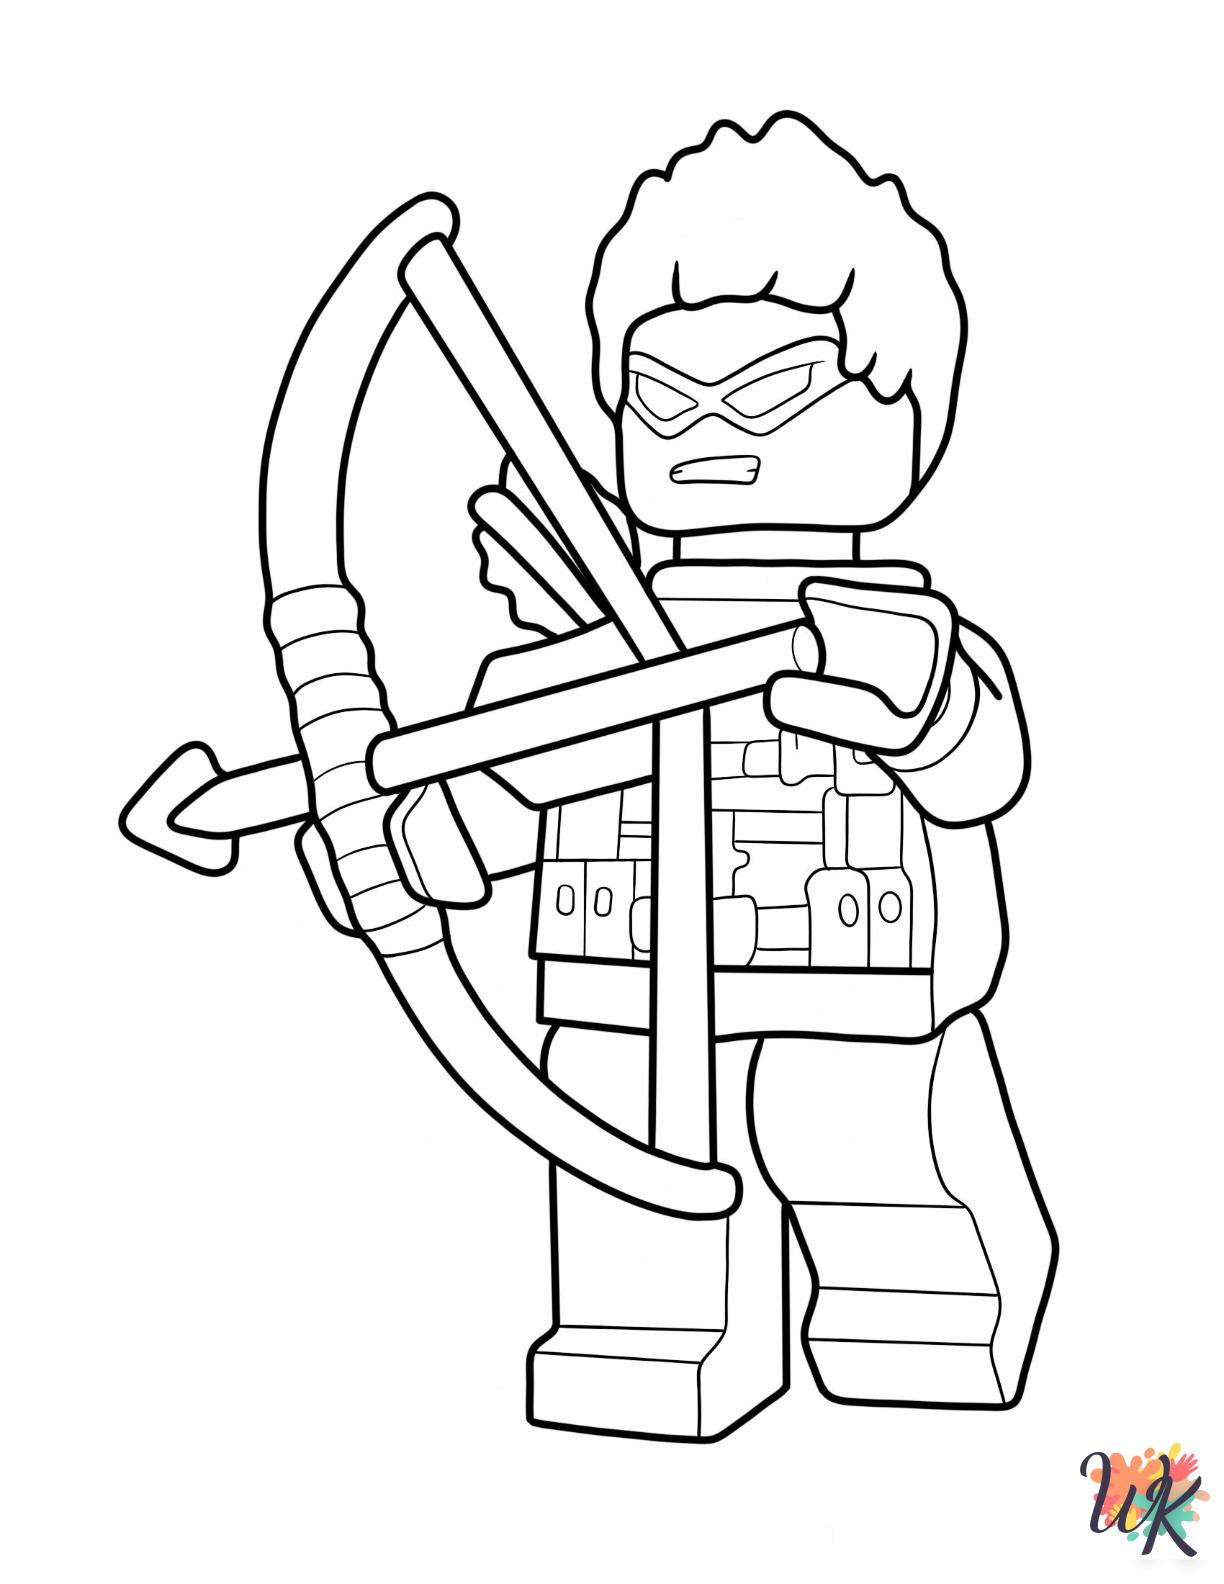 Lego Avengers decorations coloring pages